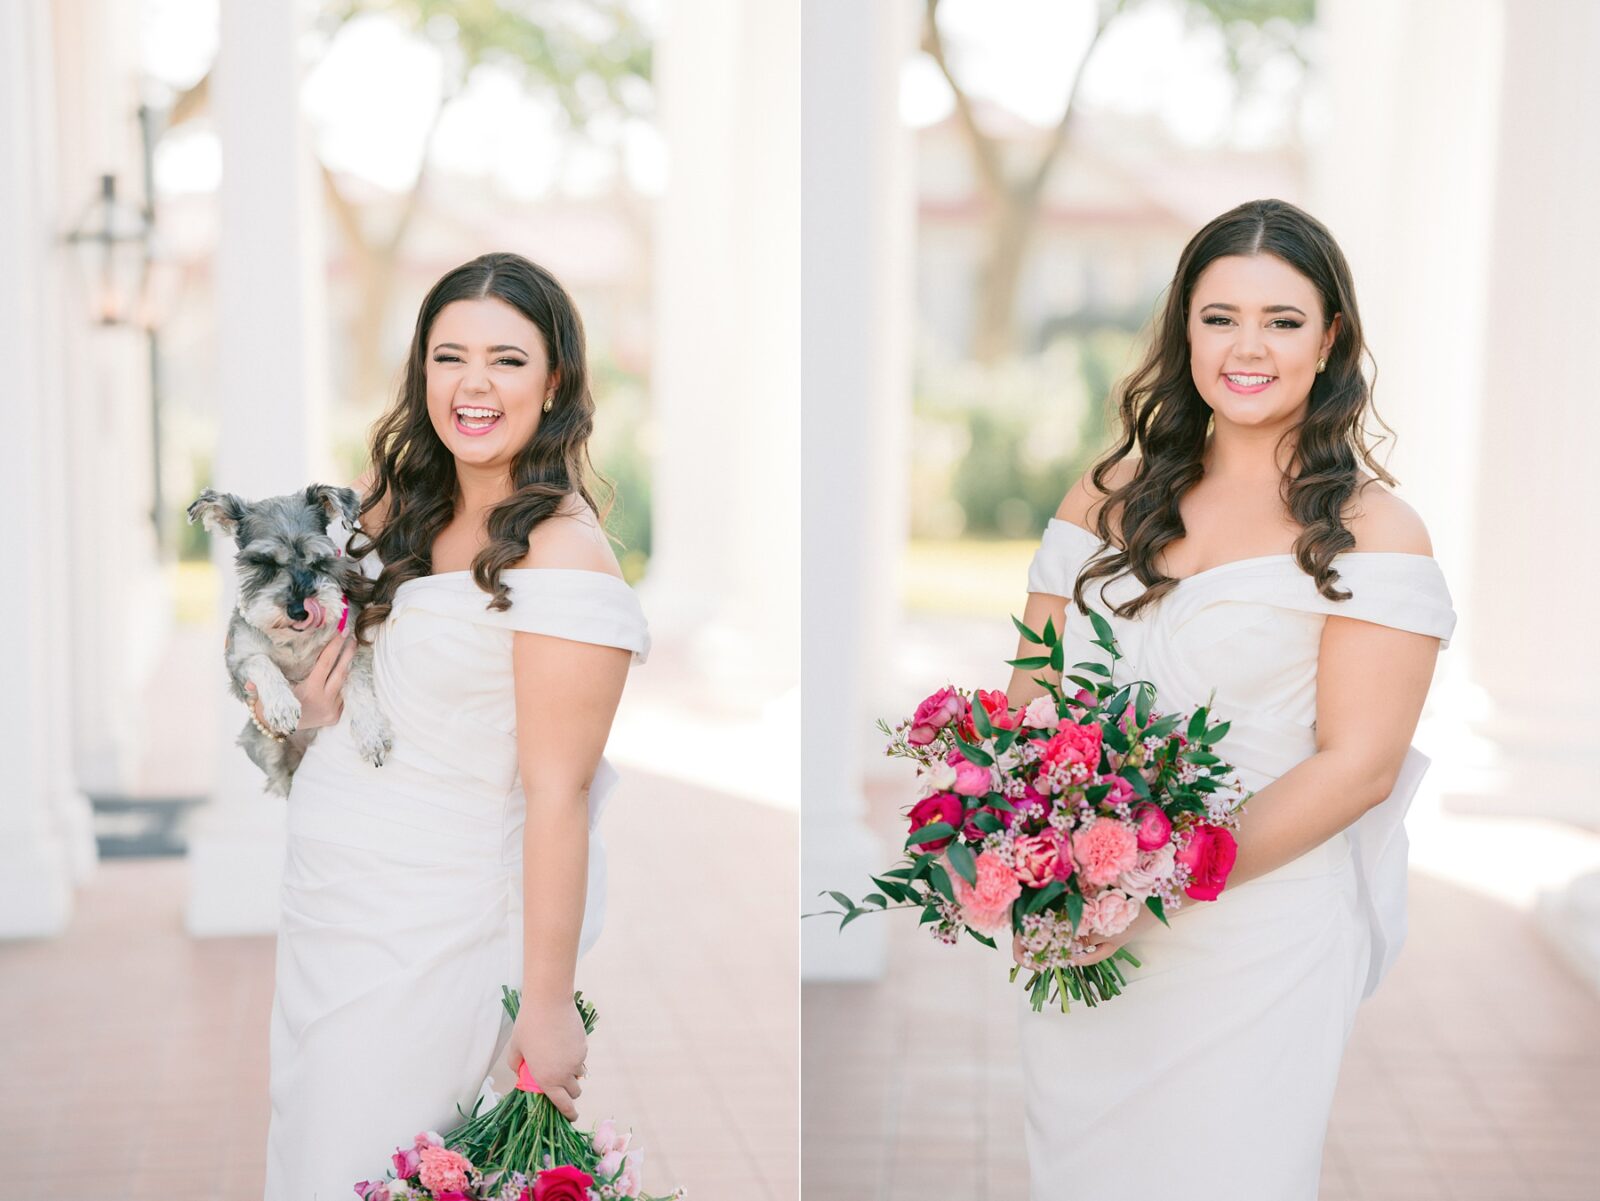 bride with dog, flower girl dog, pink floral bouquet, bridal portraits, cone flower designs, pink wedding bouquet by cone flower designs, wedding at Woodbine mansion in round rock texas, wedding photos by austin wedding photography Tara Lyons Photography, planning by The event shop